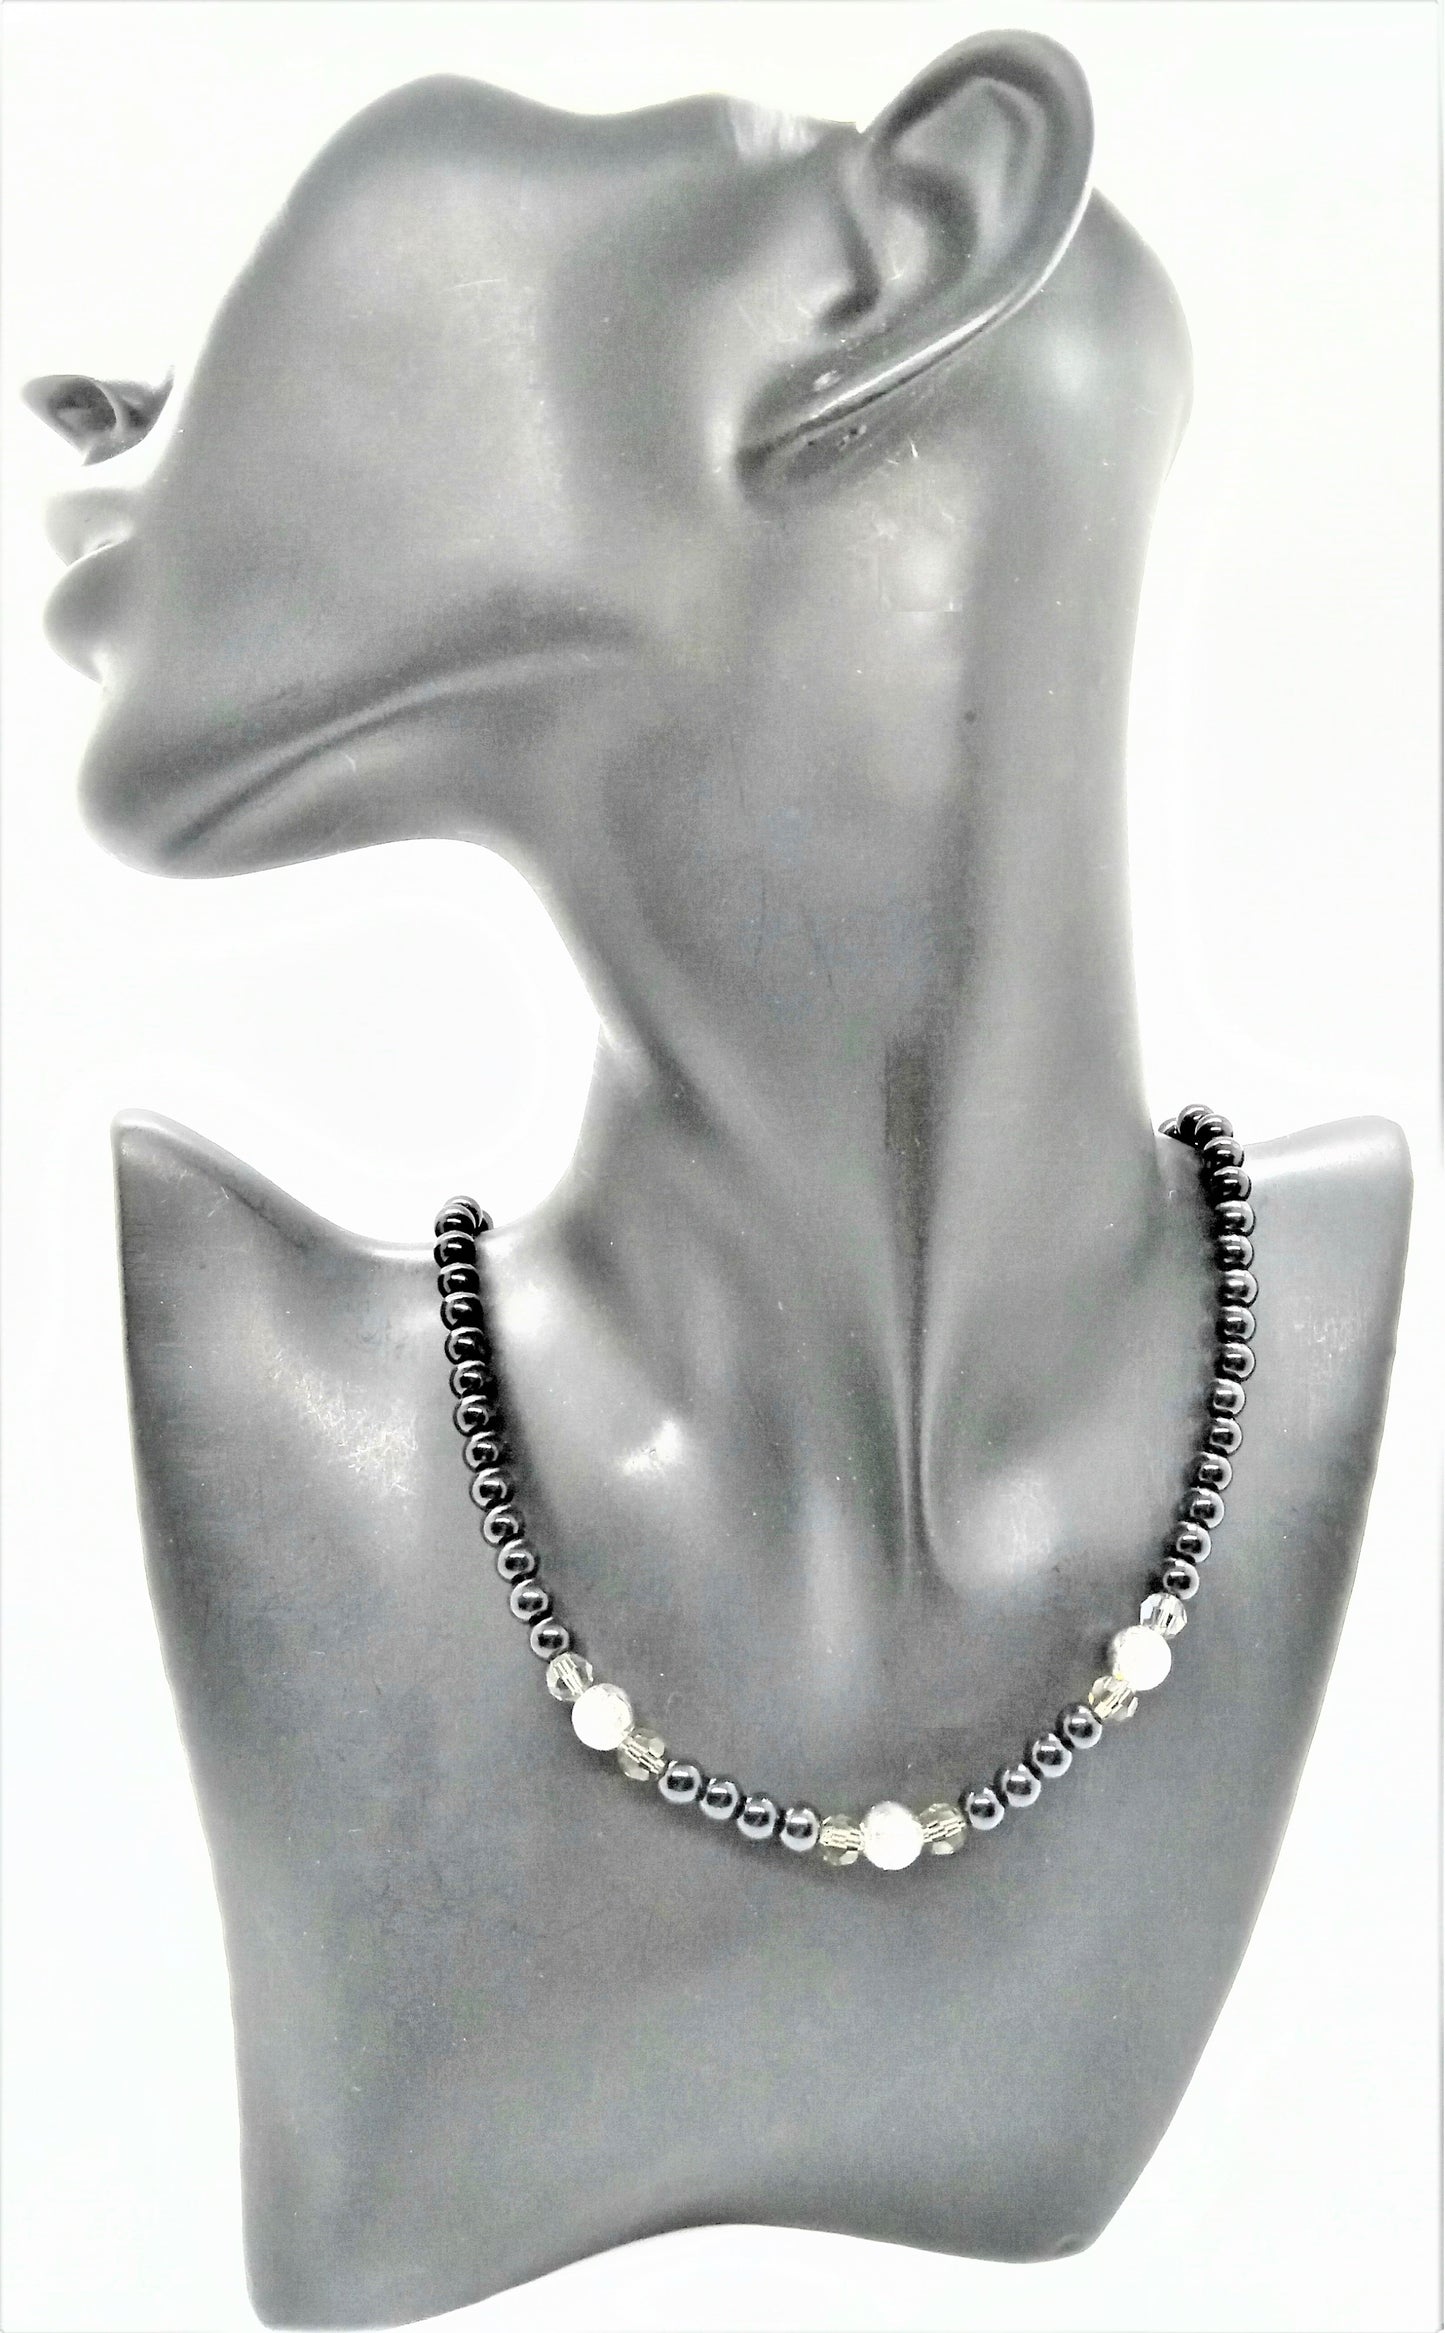 Magically Midnight Sparkle -B Necklace